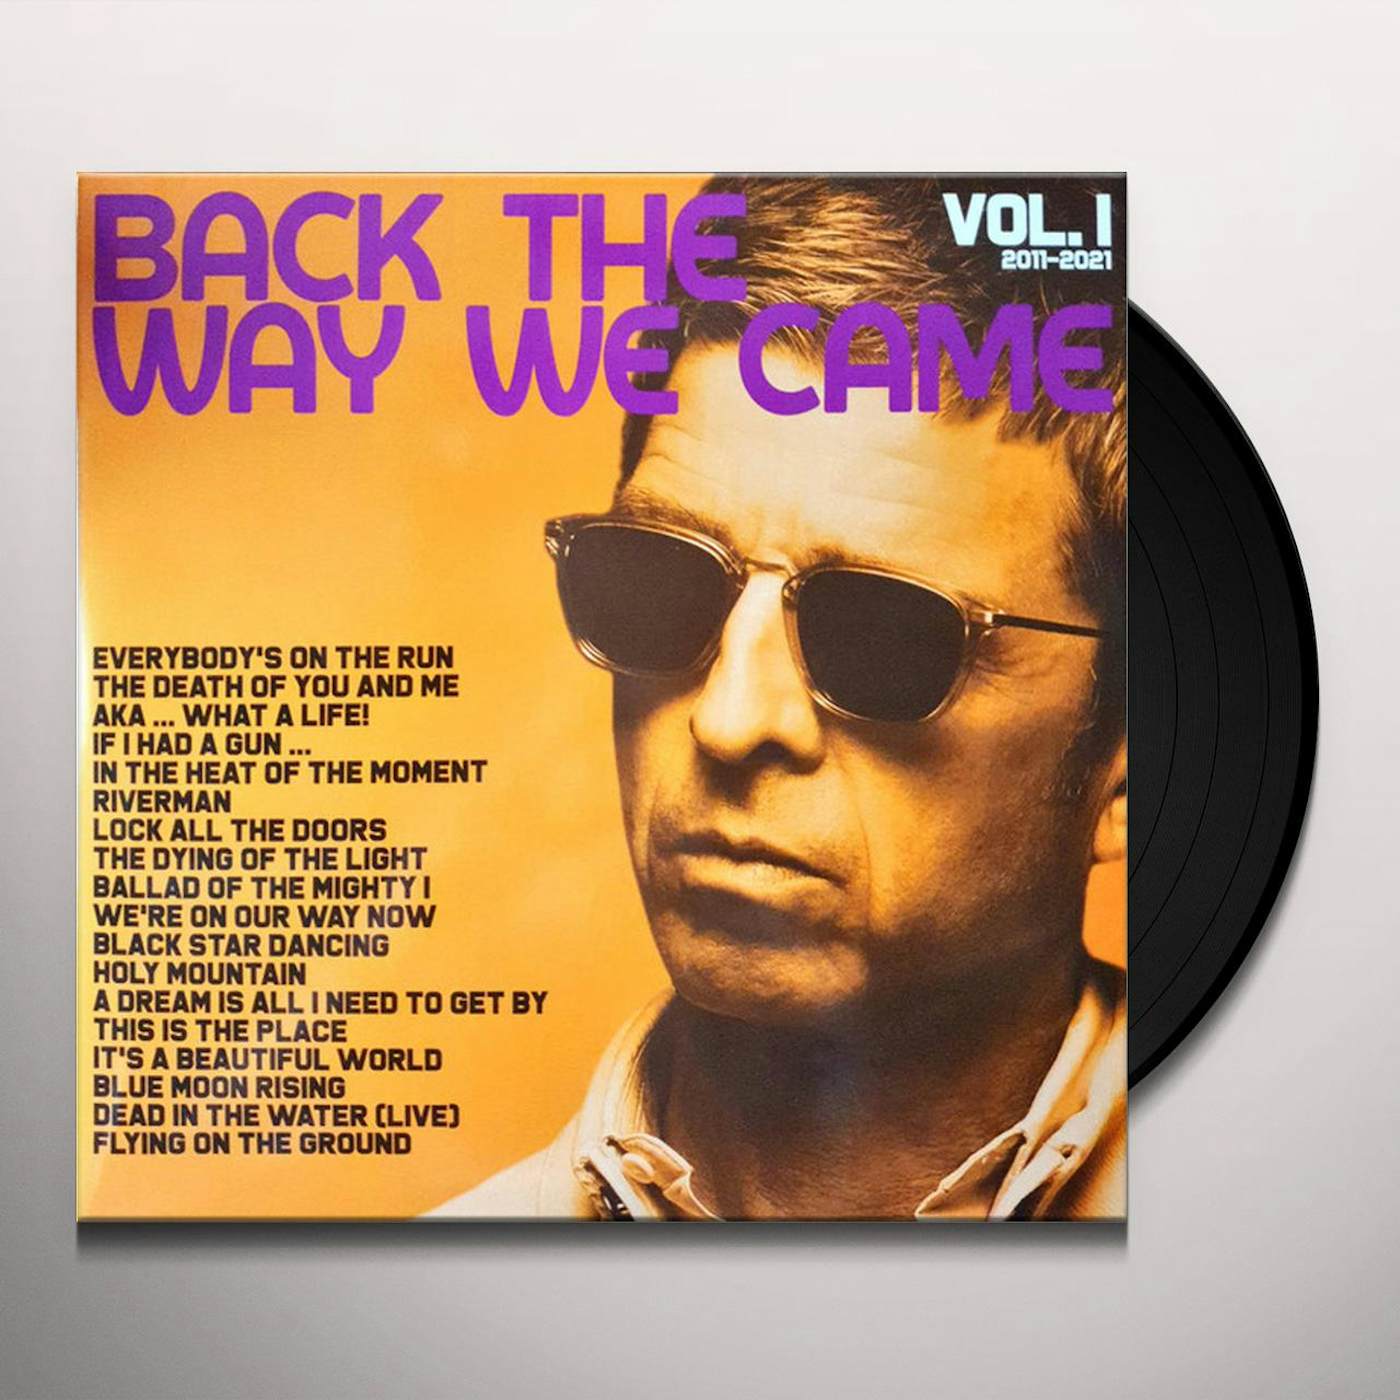 Noel Gallagher's High Flying Birds Back the Way We Came: Vol. 1 (2011 - 2021) Vinyl Record